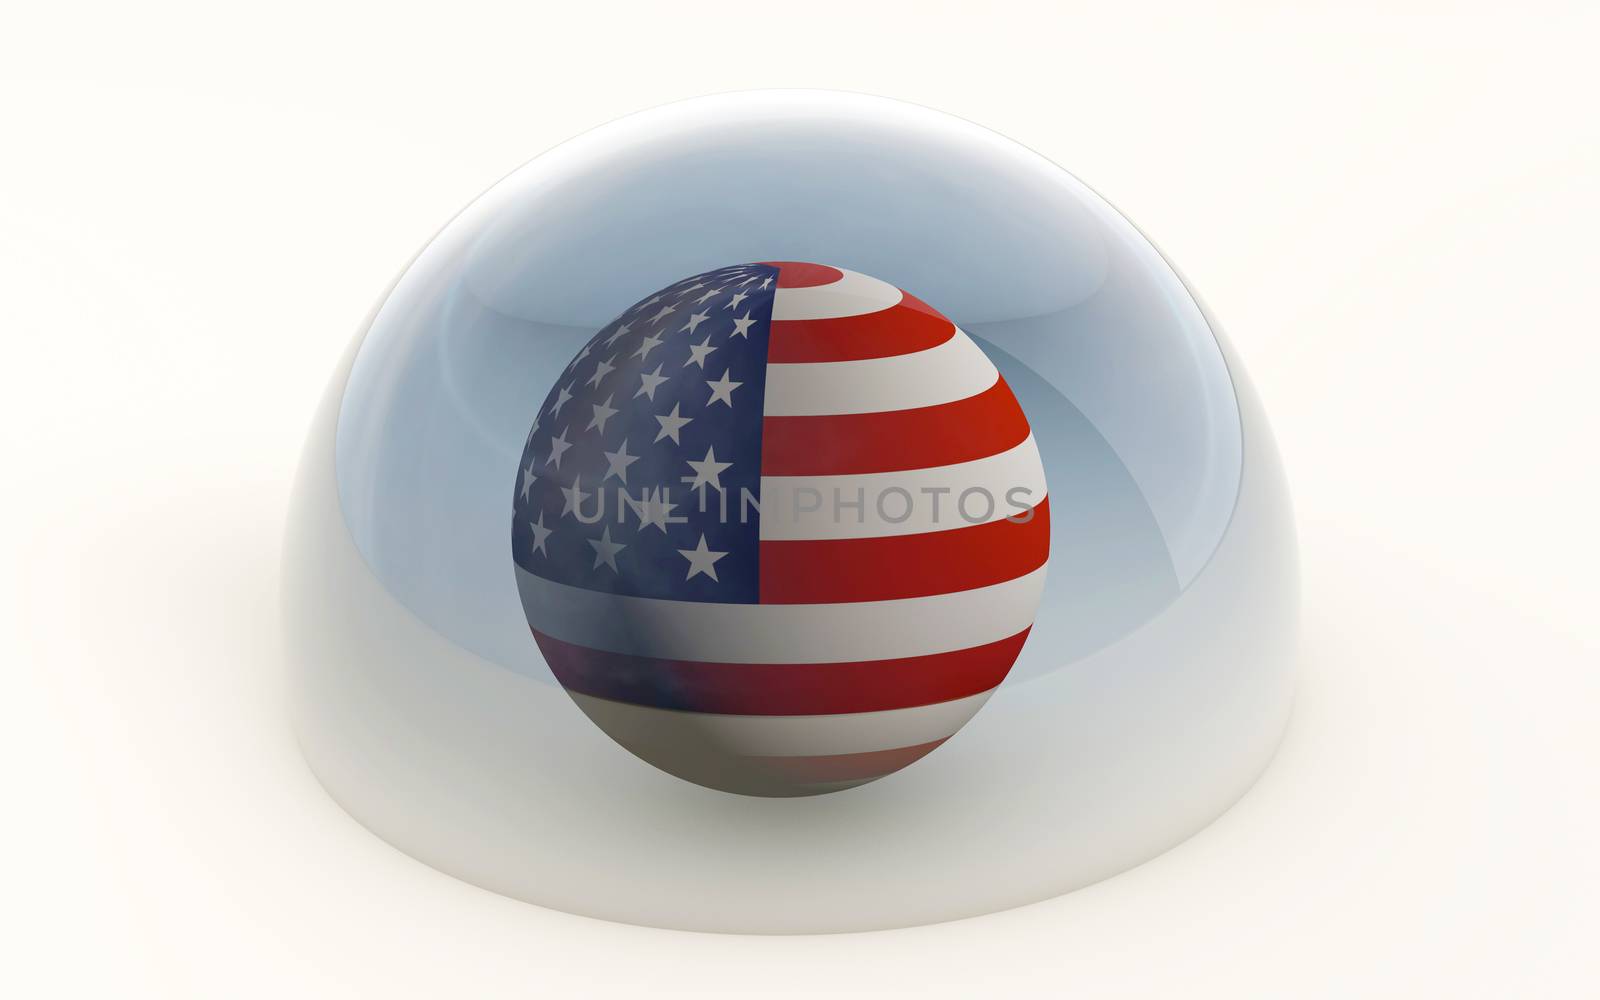 3d rendering of the united states flag protected under a glass dome isolated on white